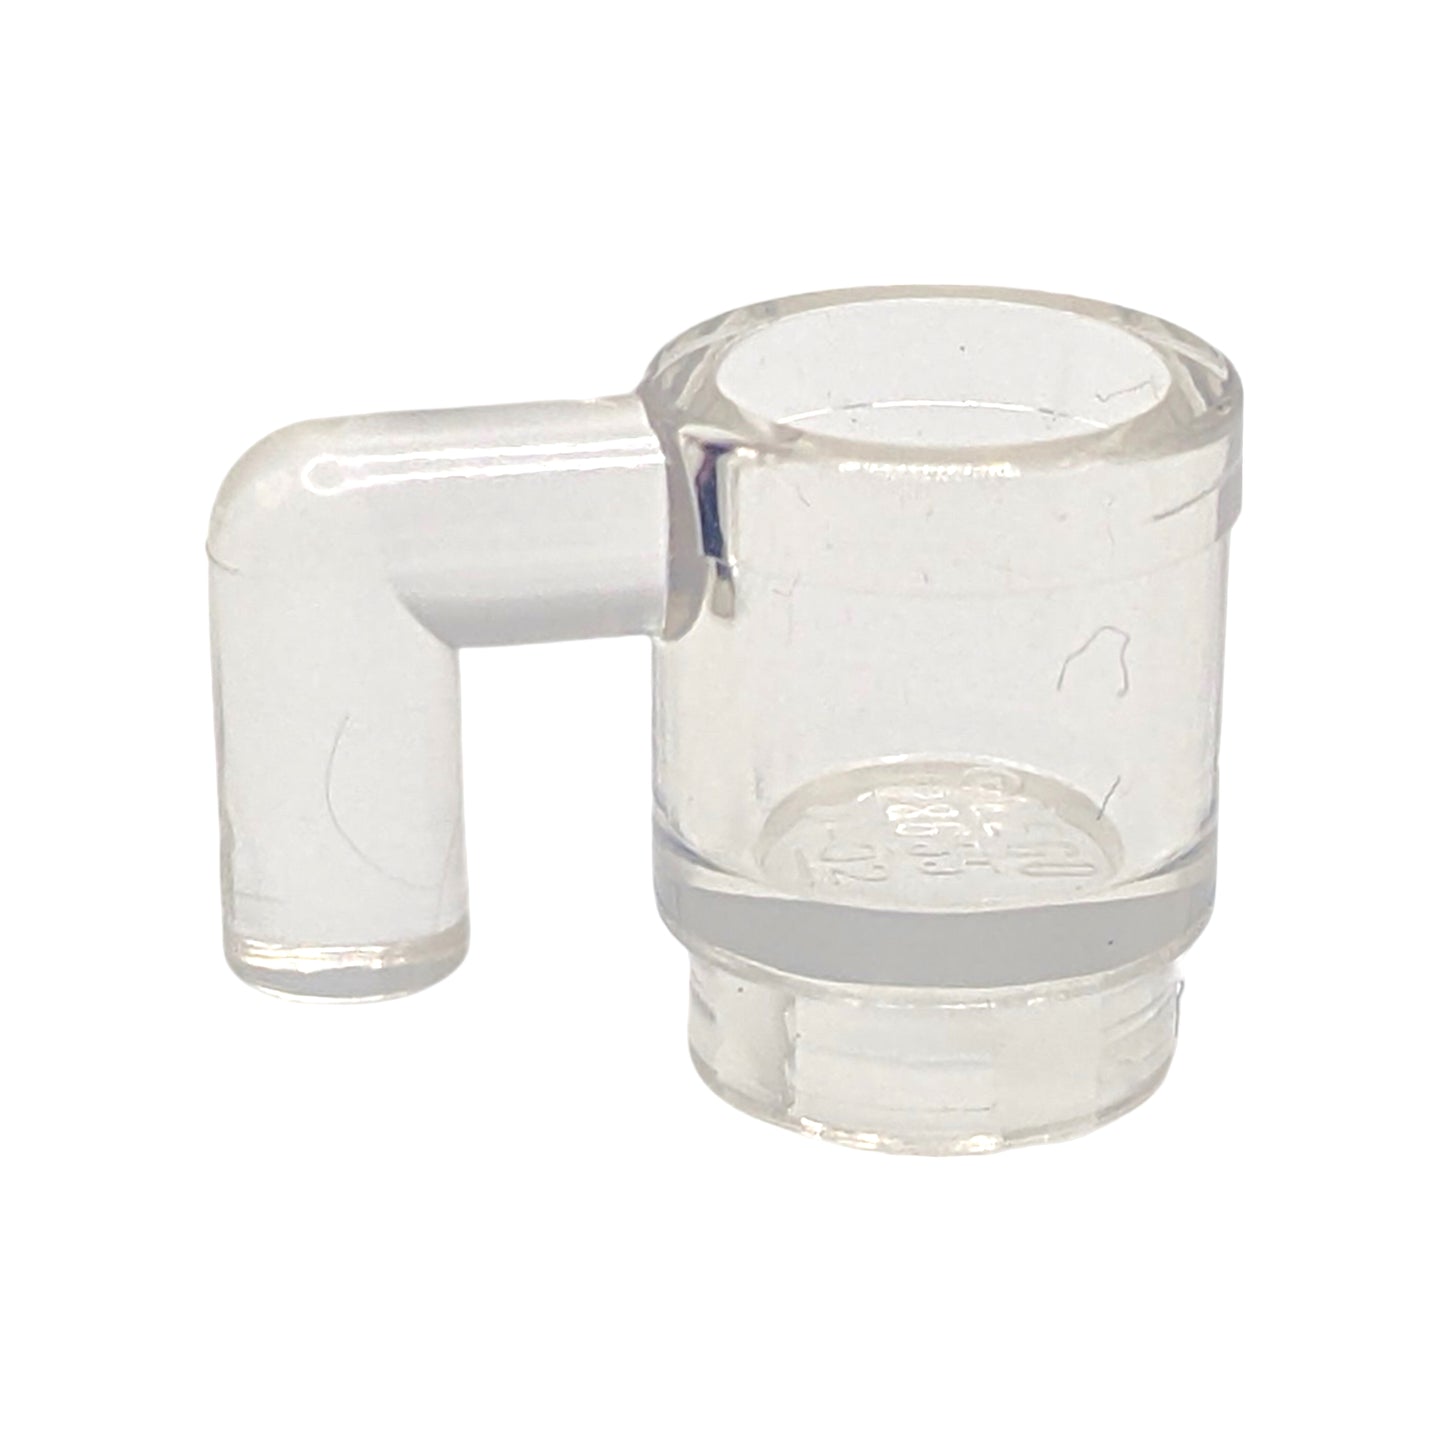 LEGO - Tasse / Cup in Trans Clear